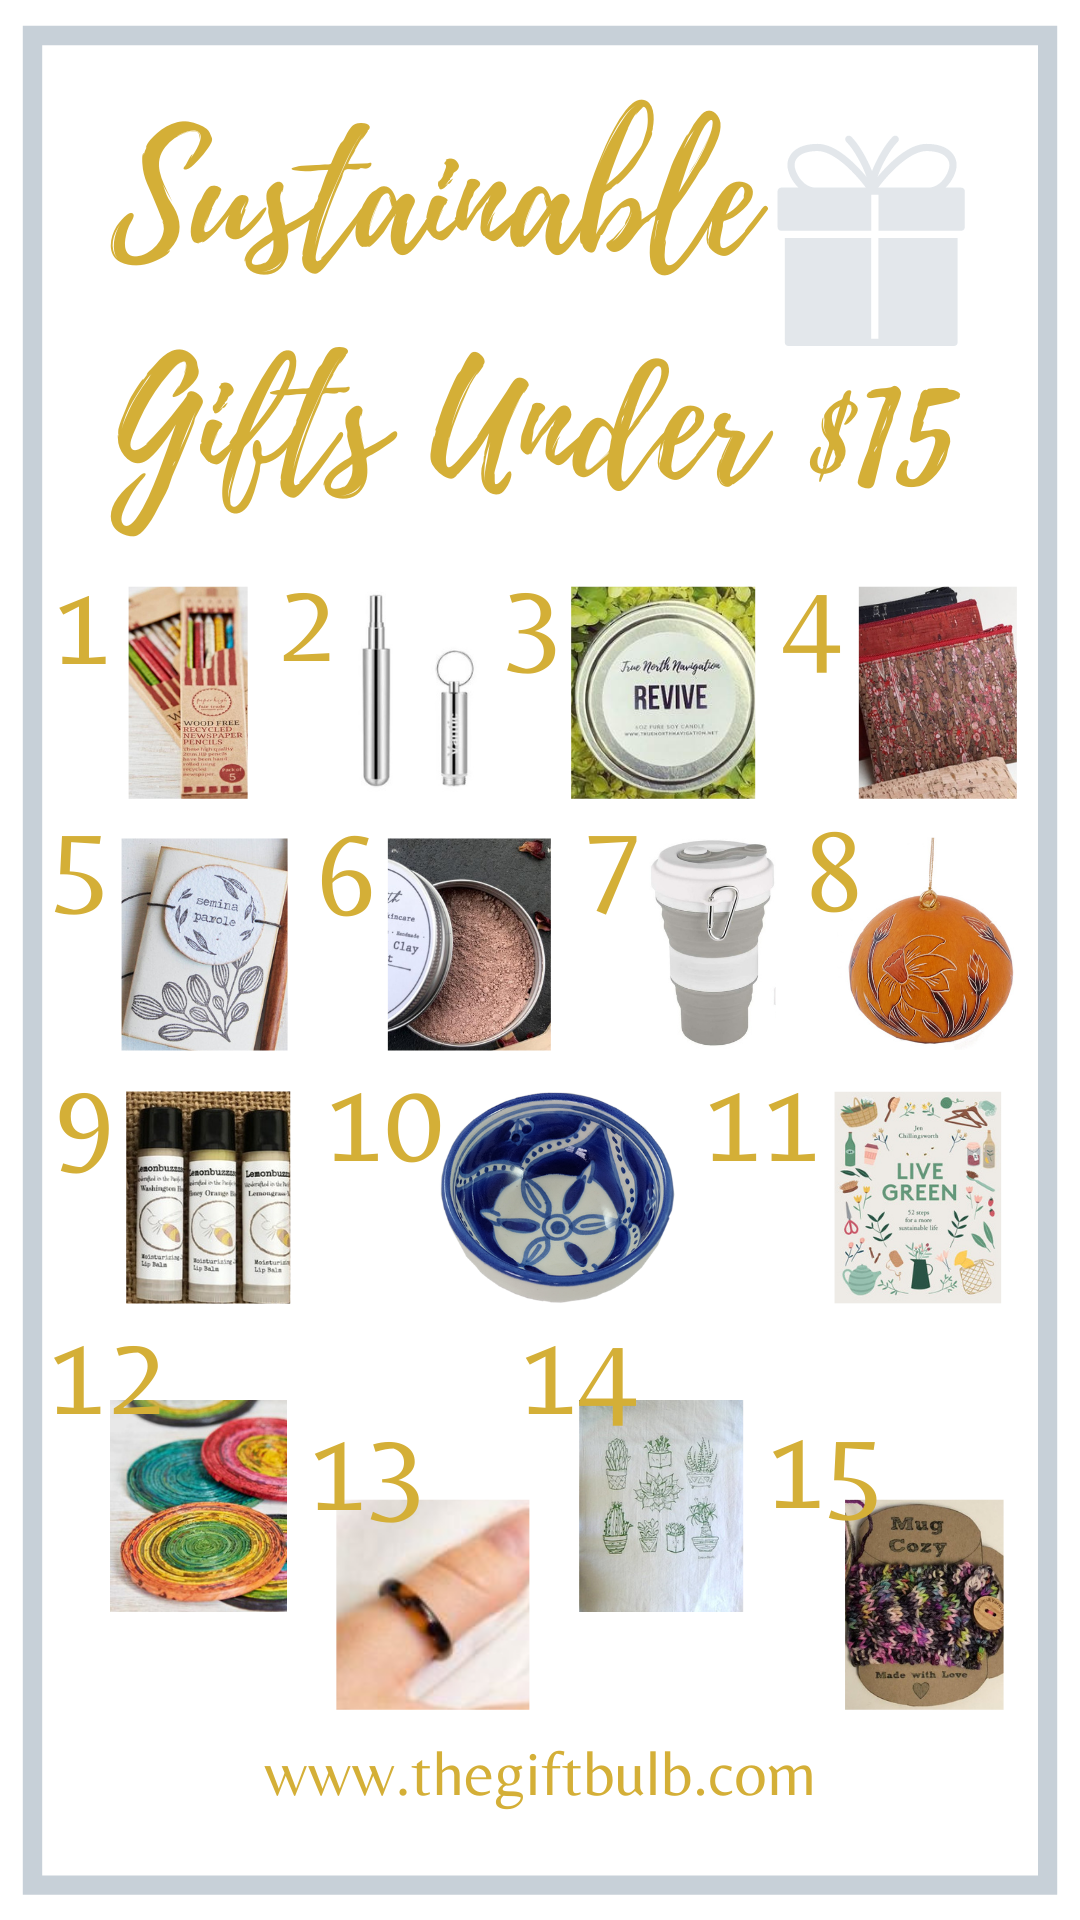  Gifts Under 75 Dollars